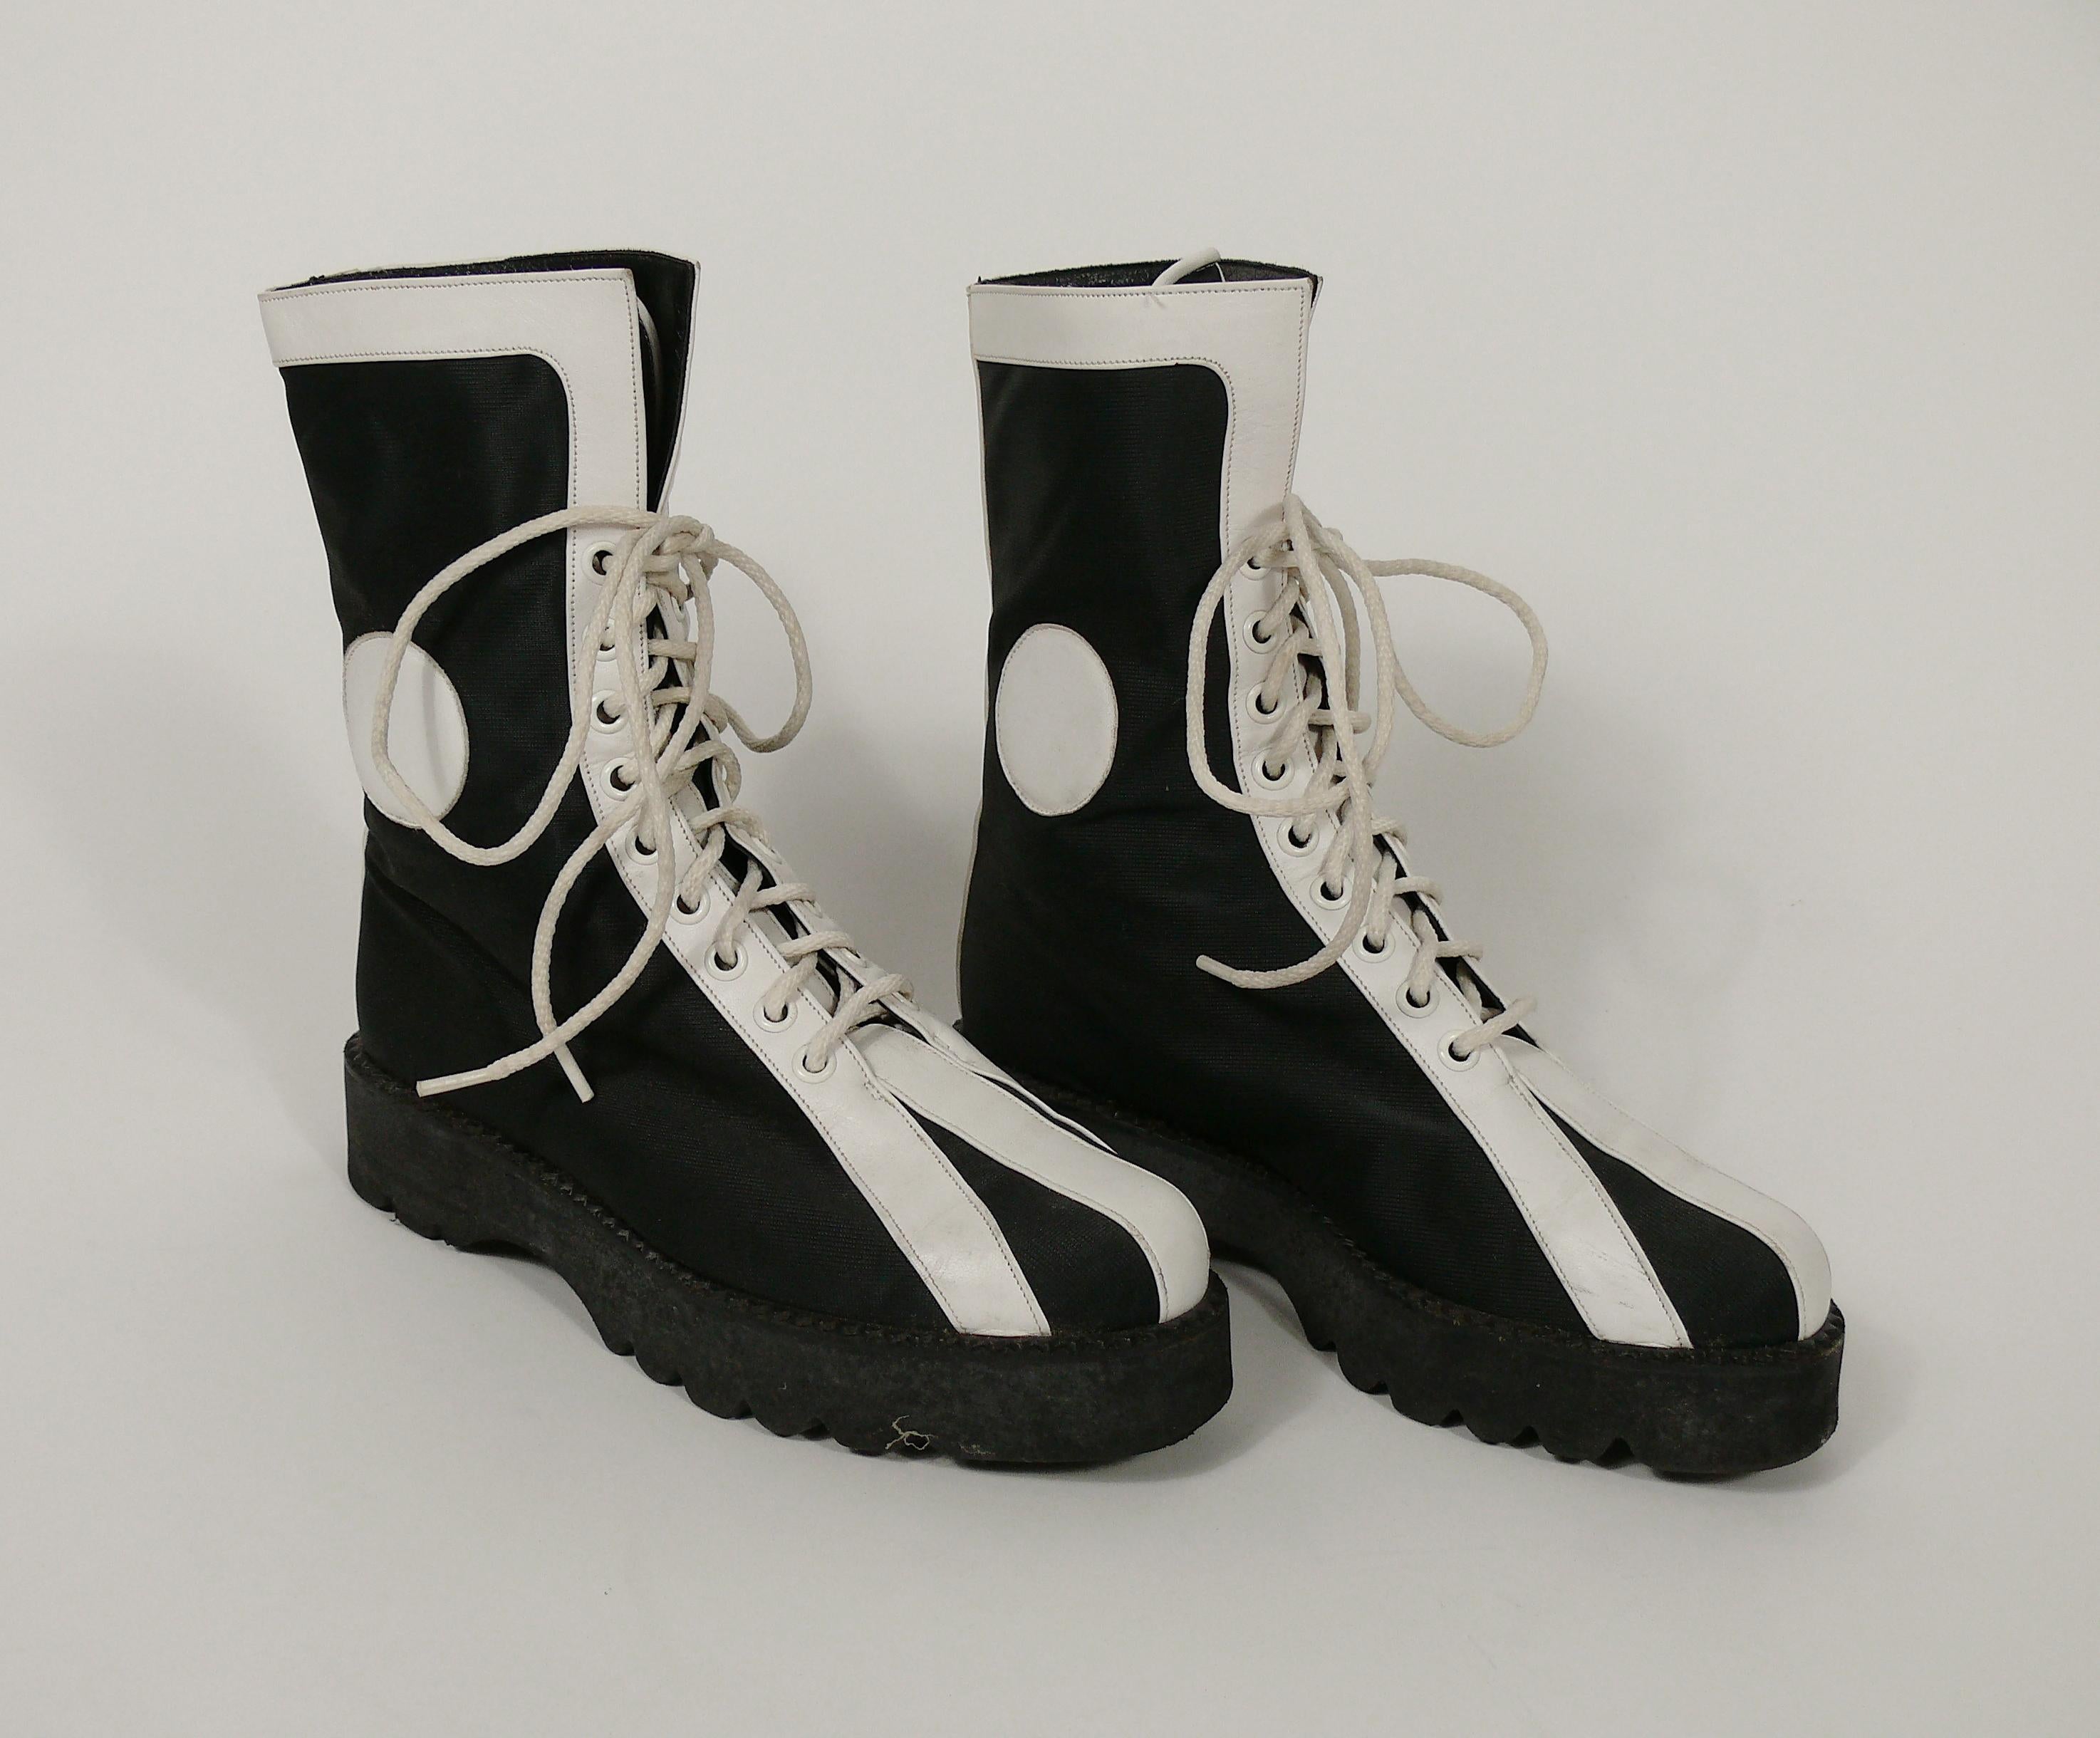 karl lagerfeld white boots